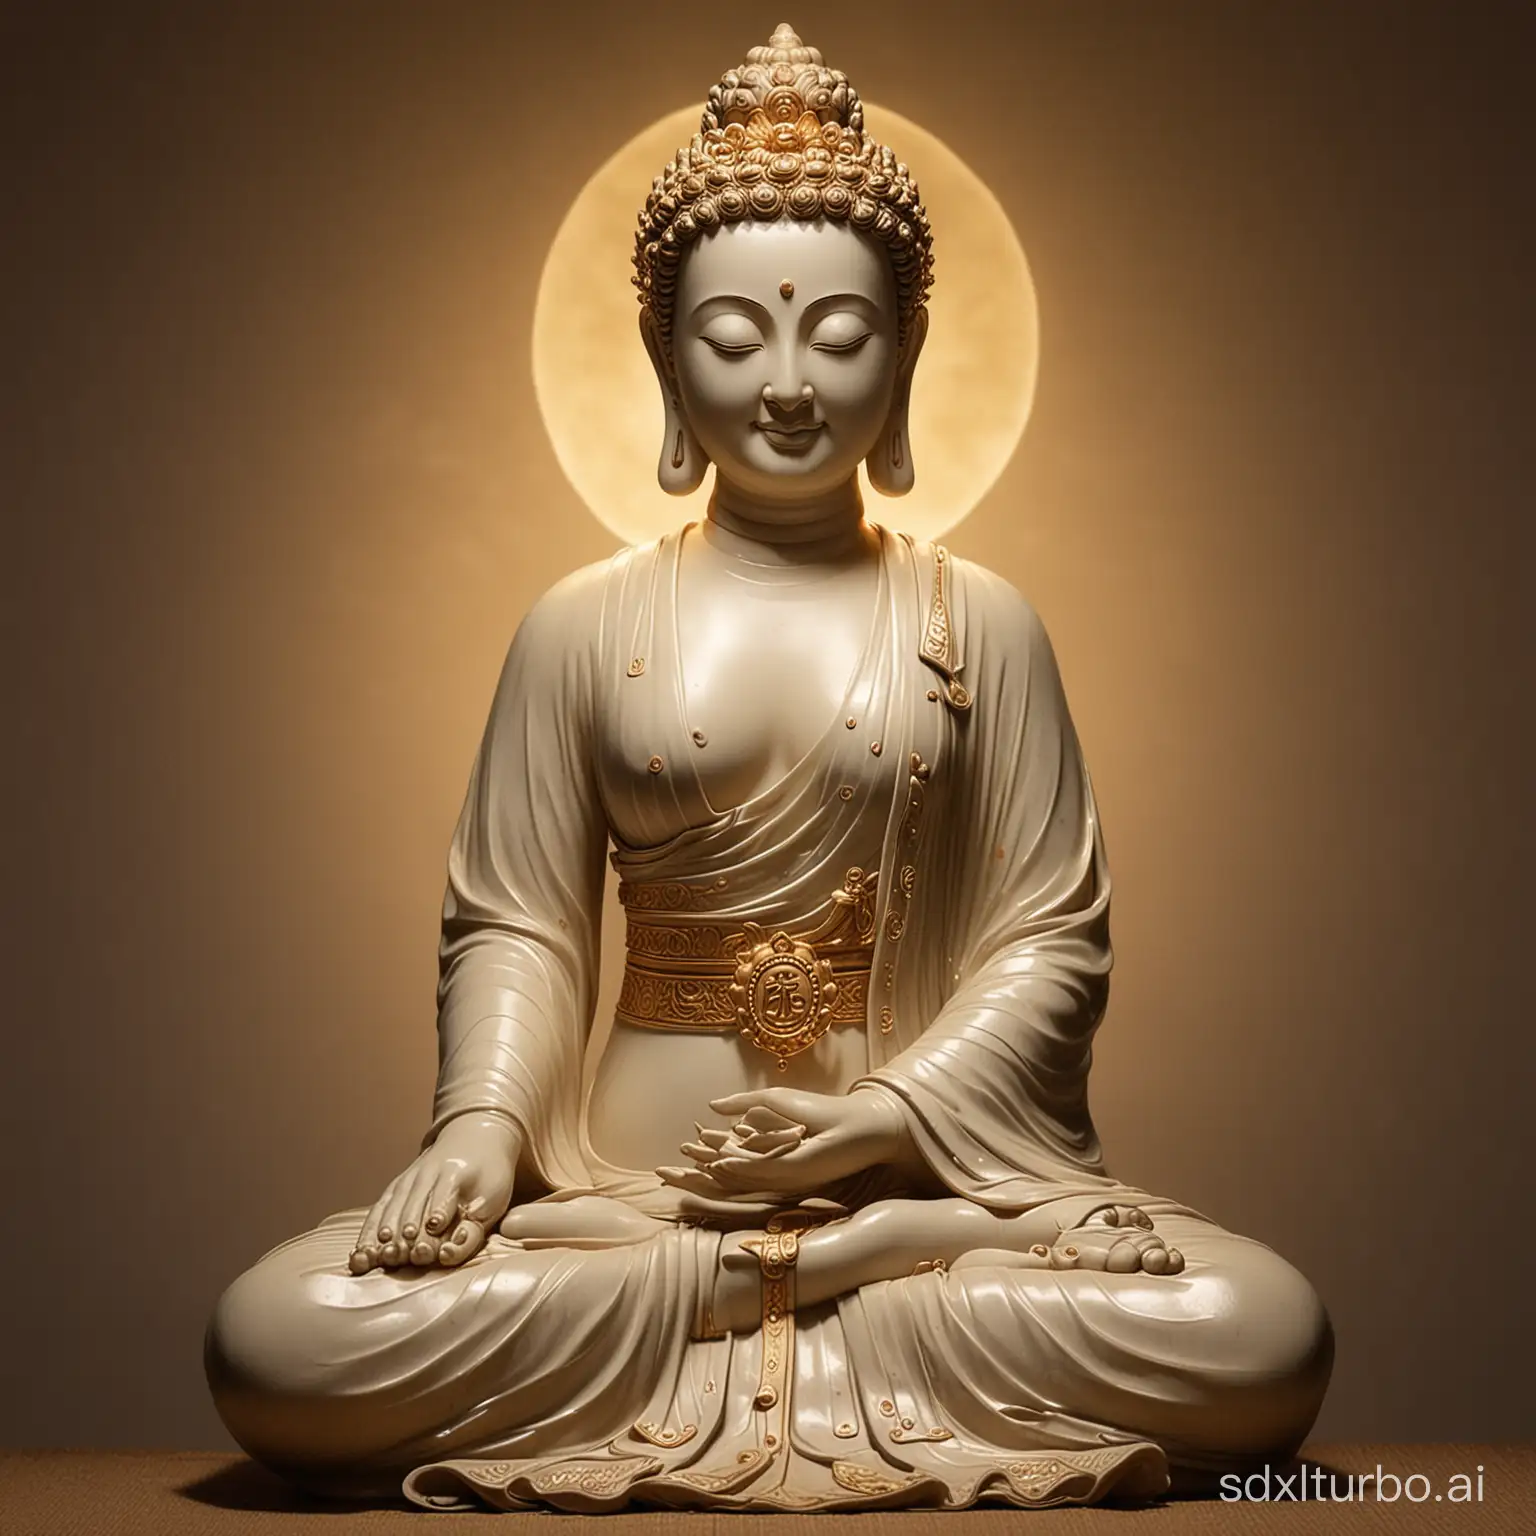 The real-life version of Guanyin Bodhisattva, with Buddha light behind her, sitting cross-legged, with a smiling face, beautiful.